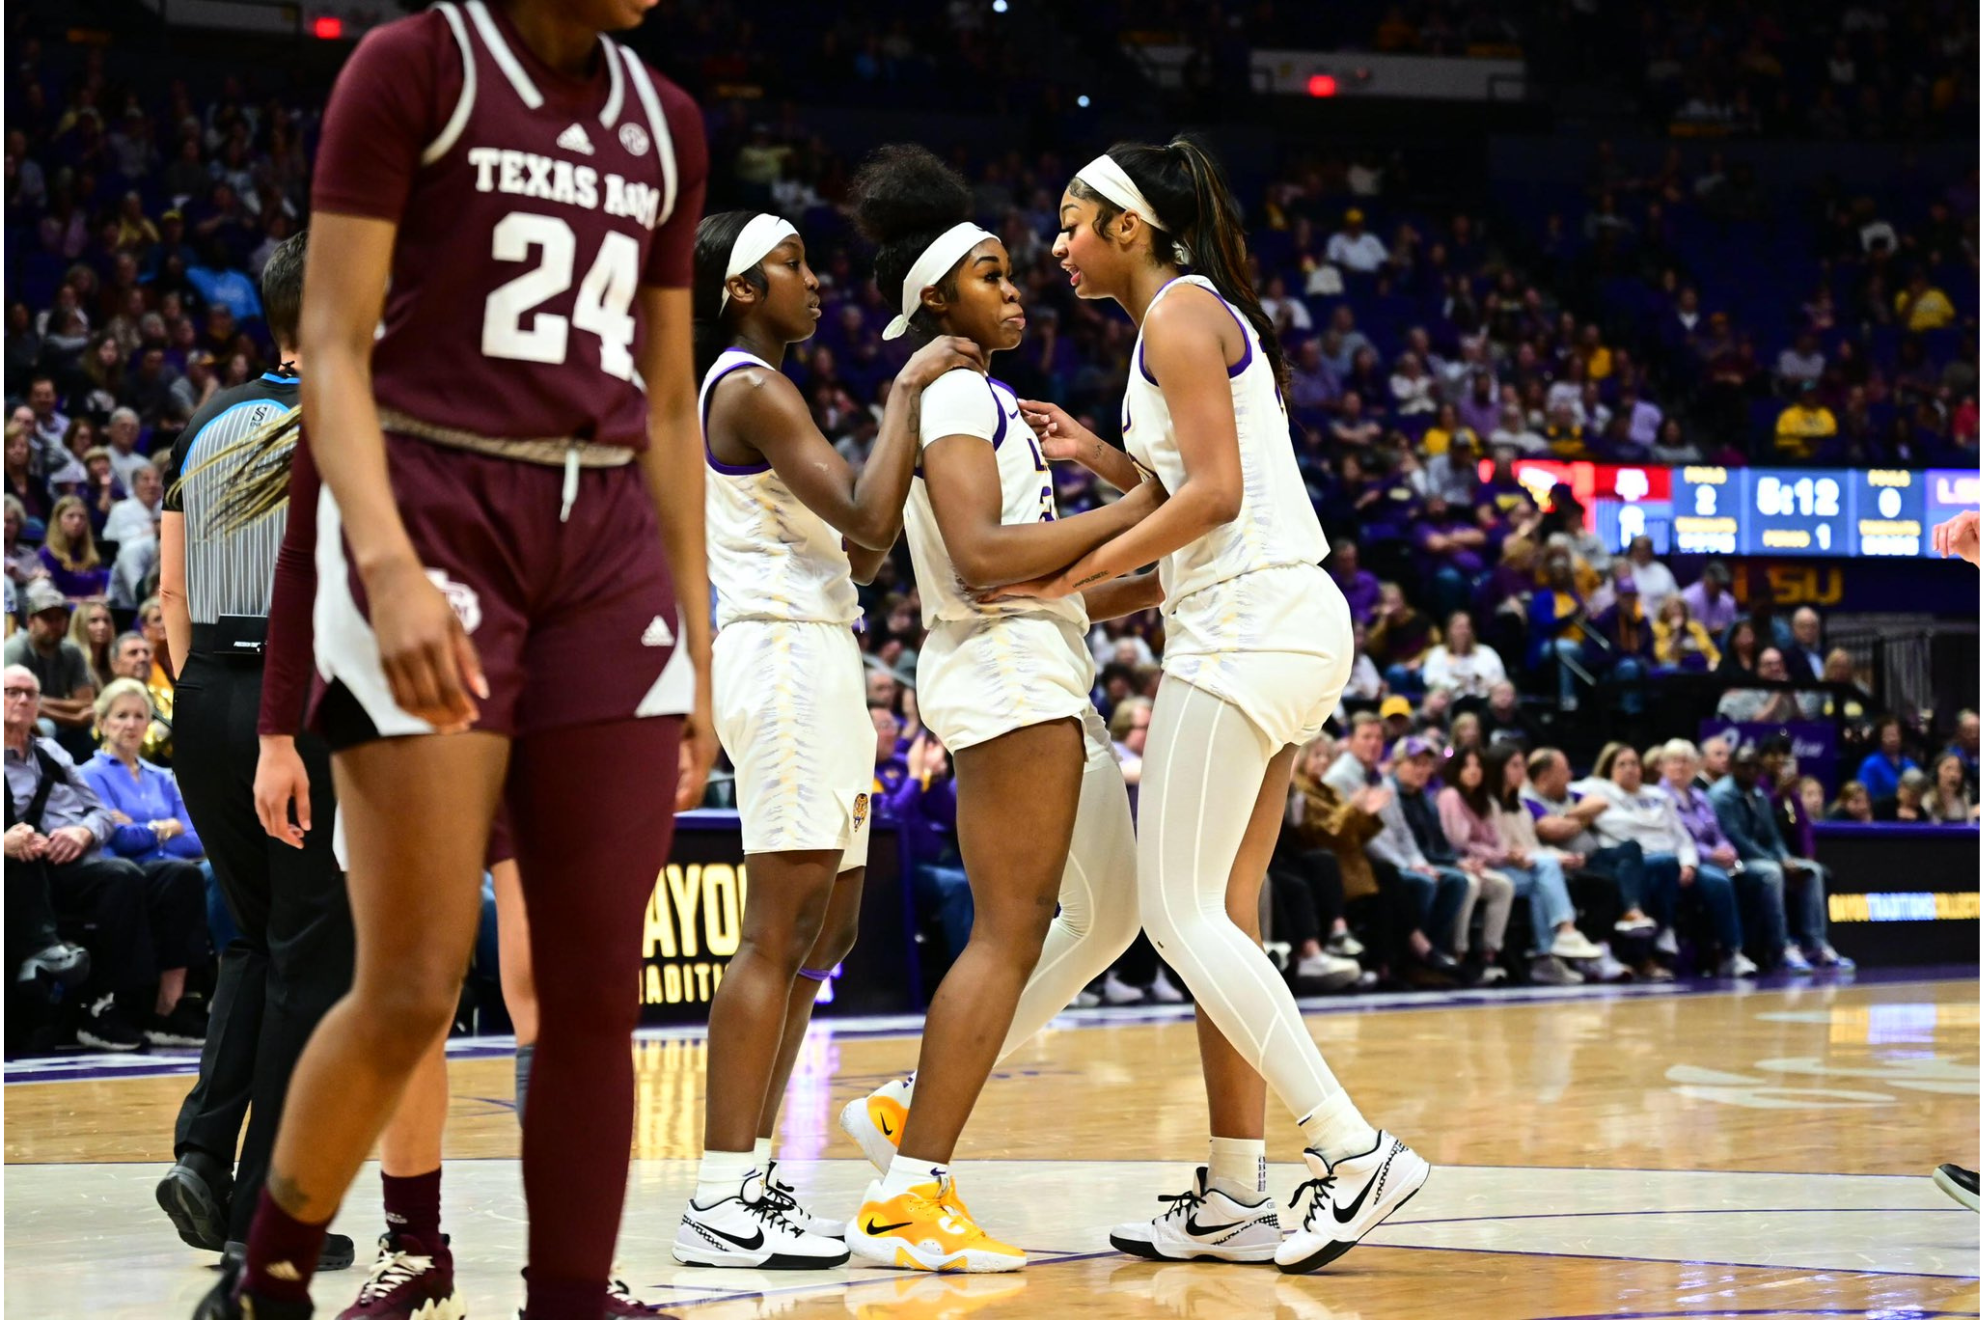 Angel Reese communicates with her LSU teammates.